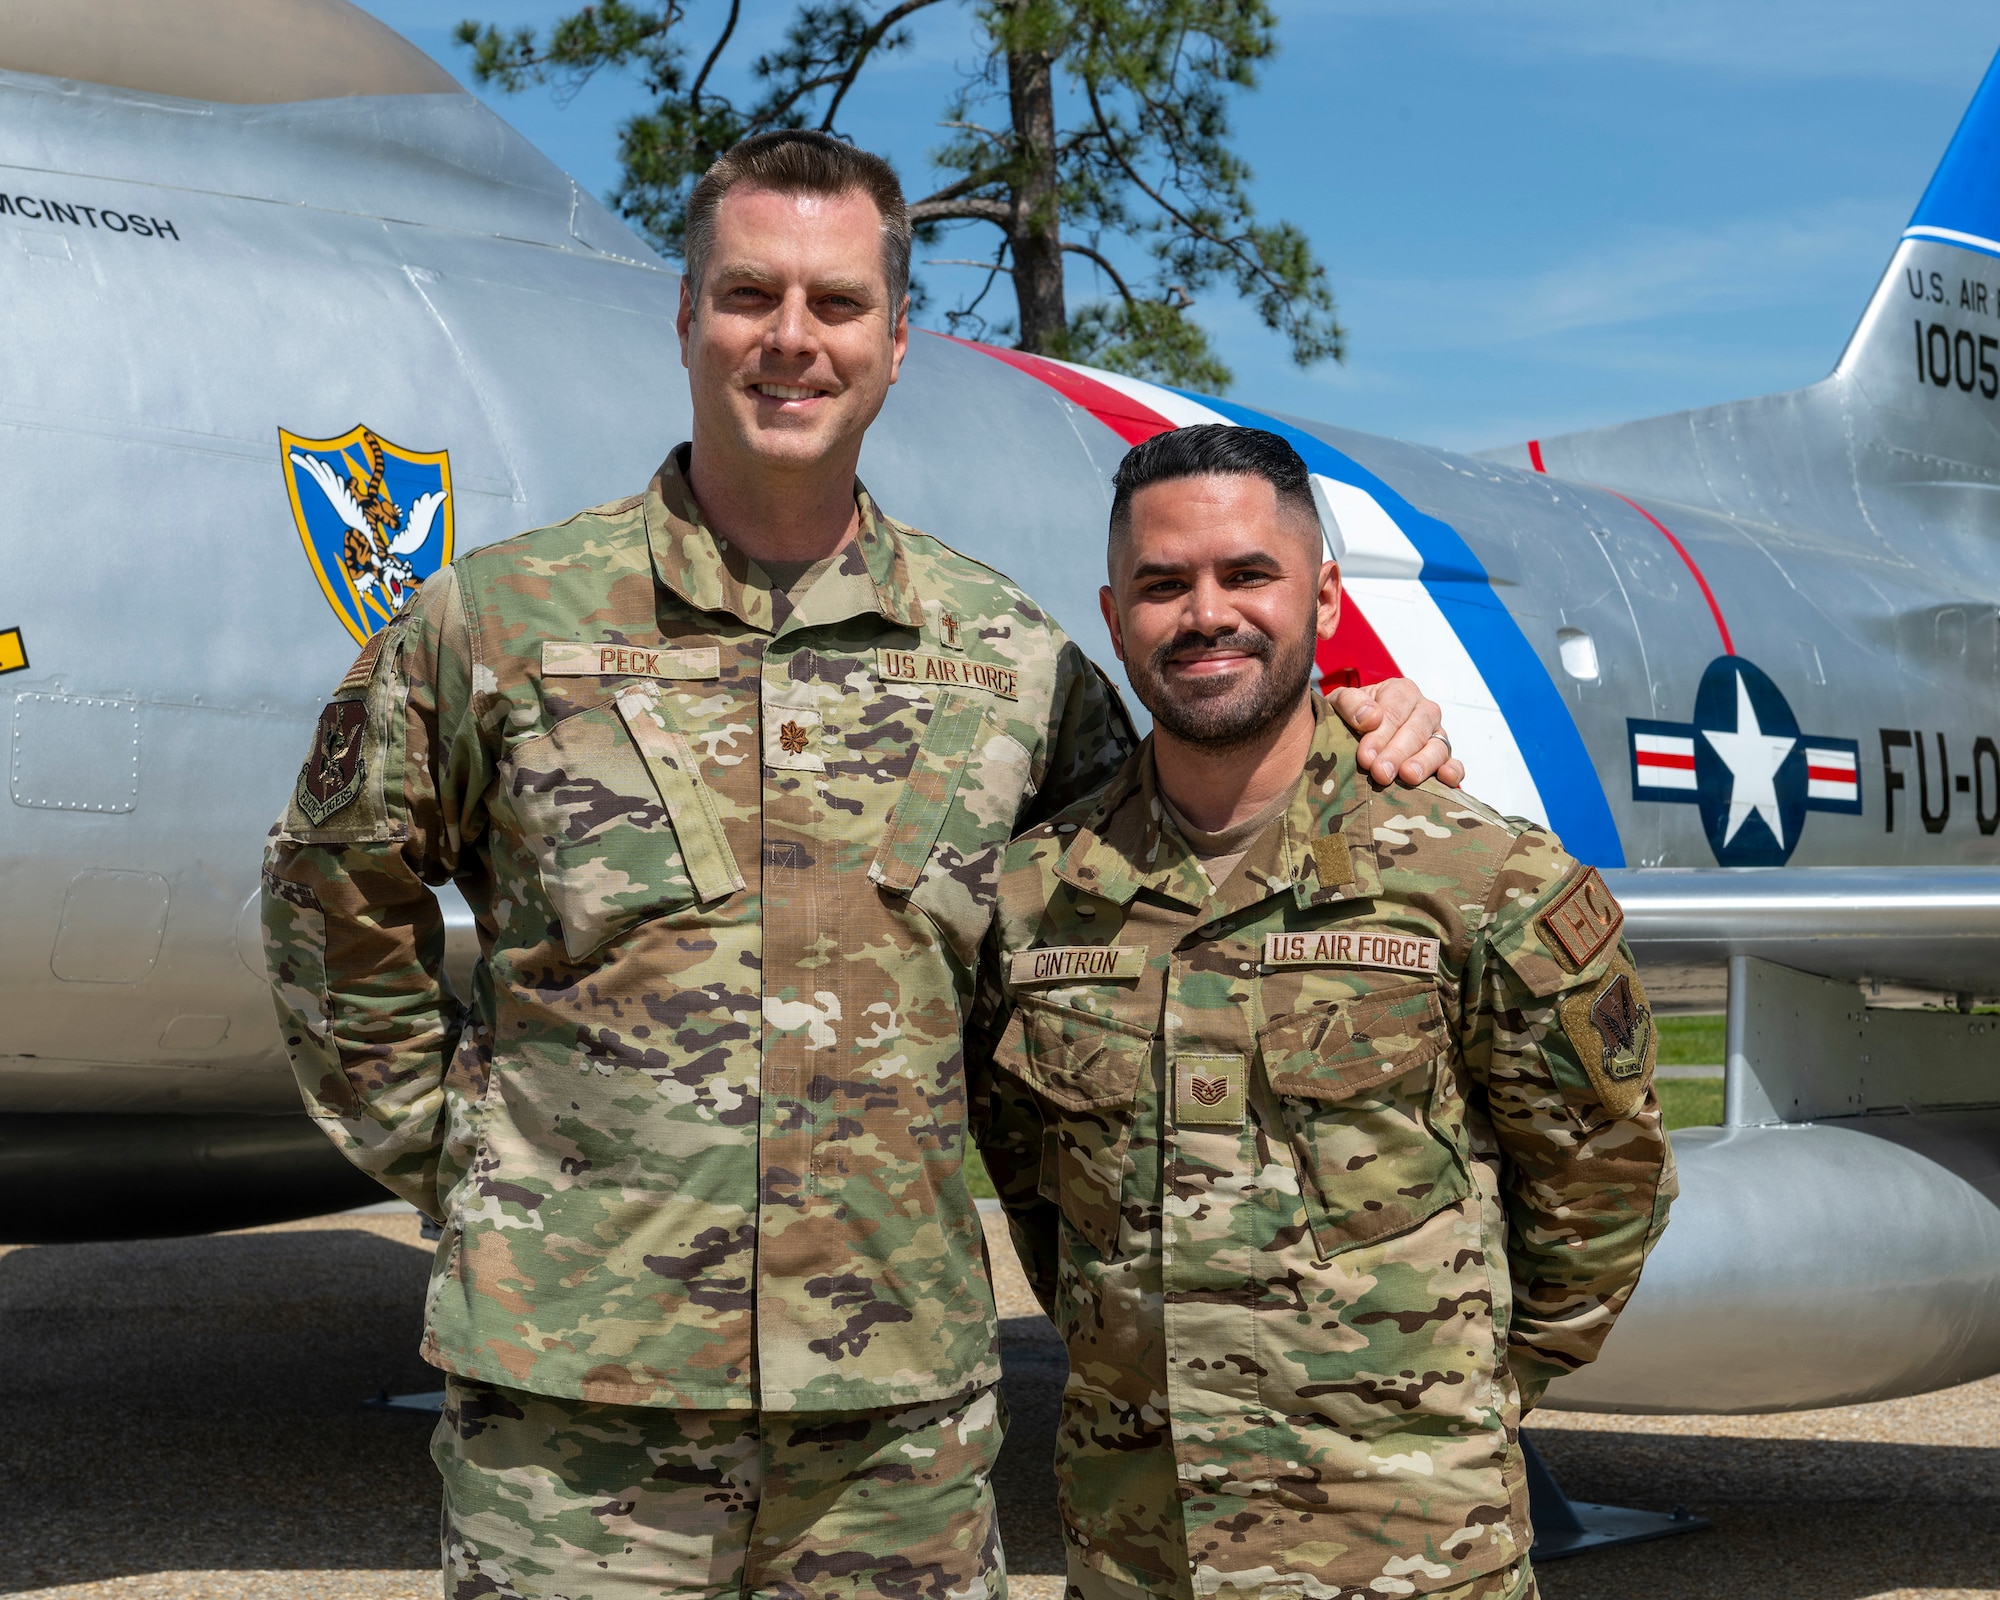 A photo of two people in uniform standing next to each other in front of an aircraft.